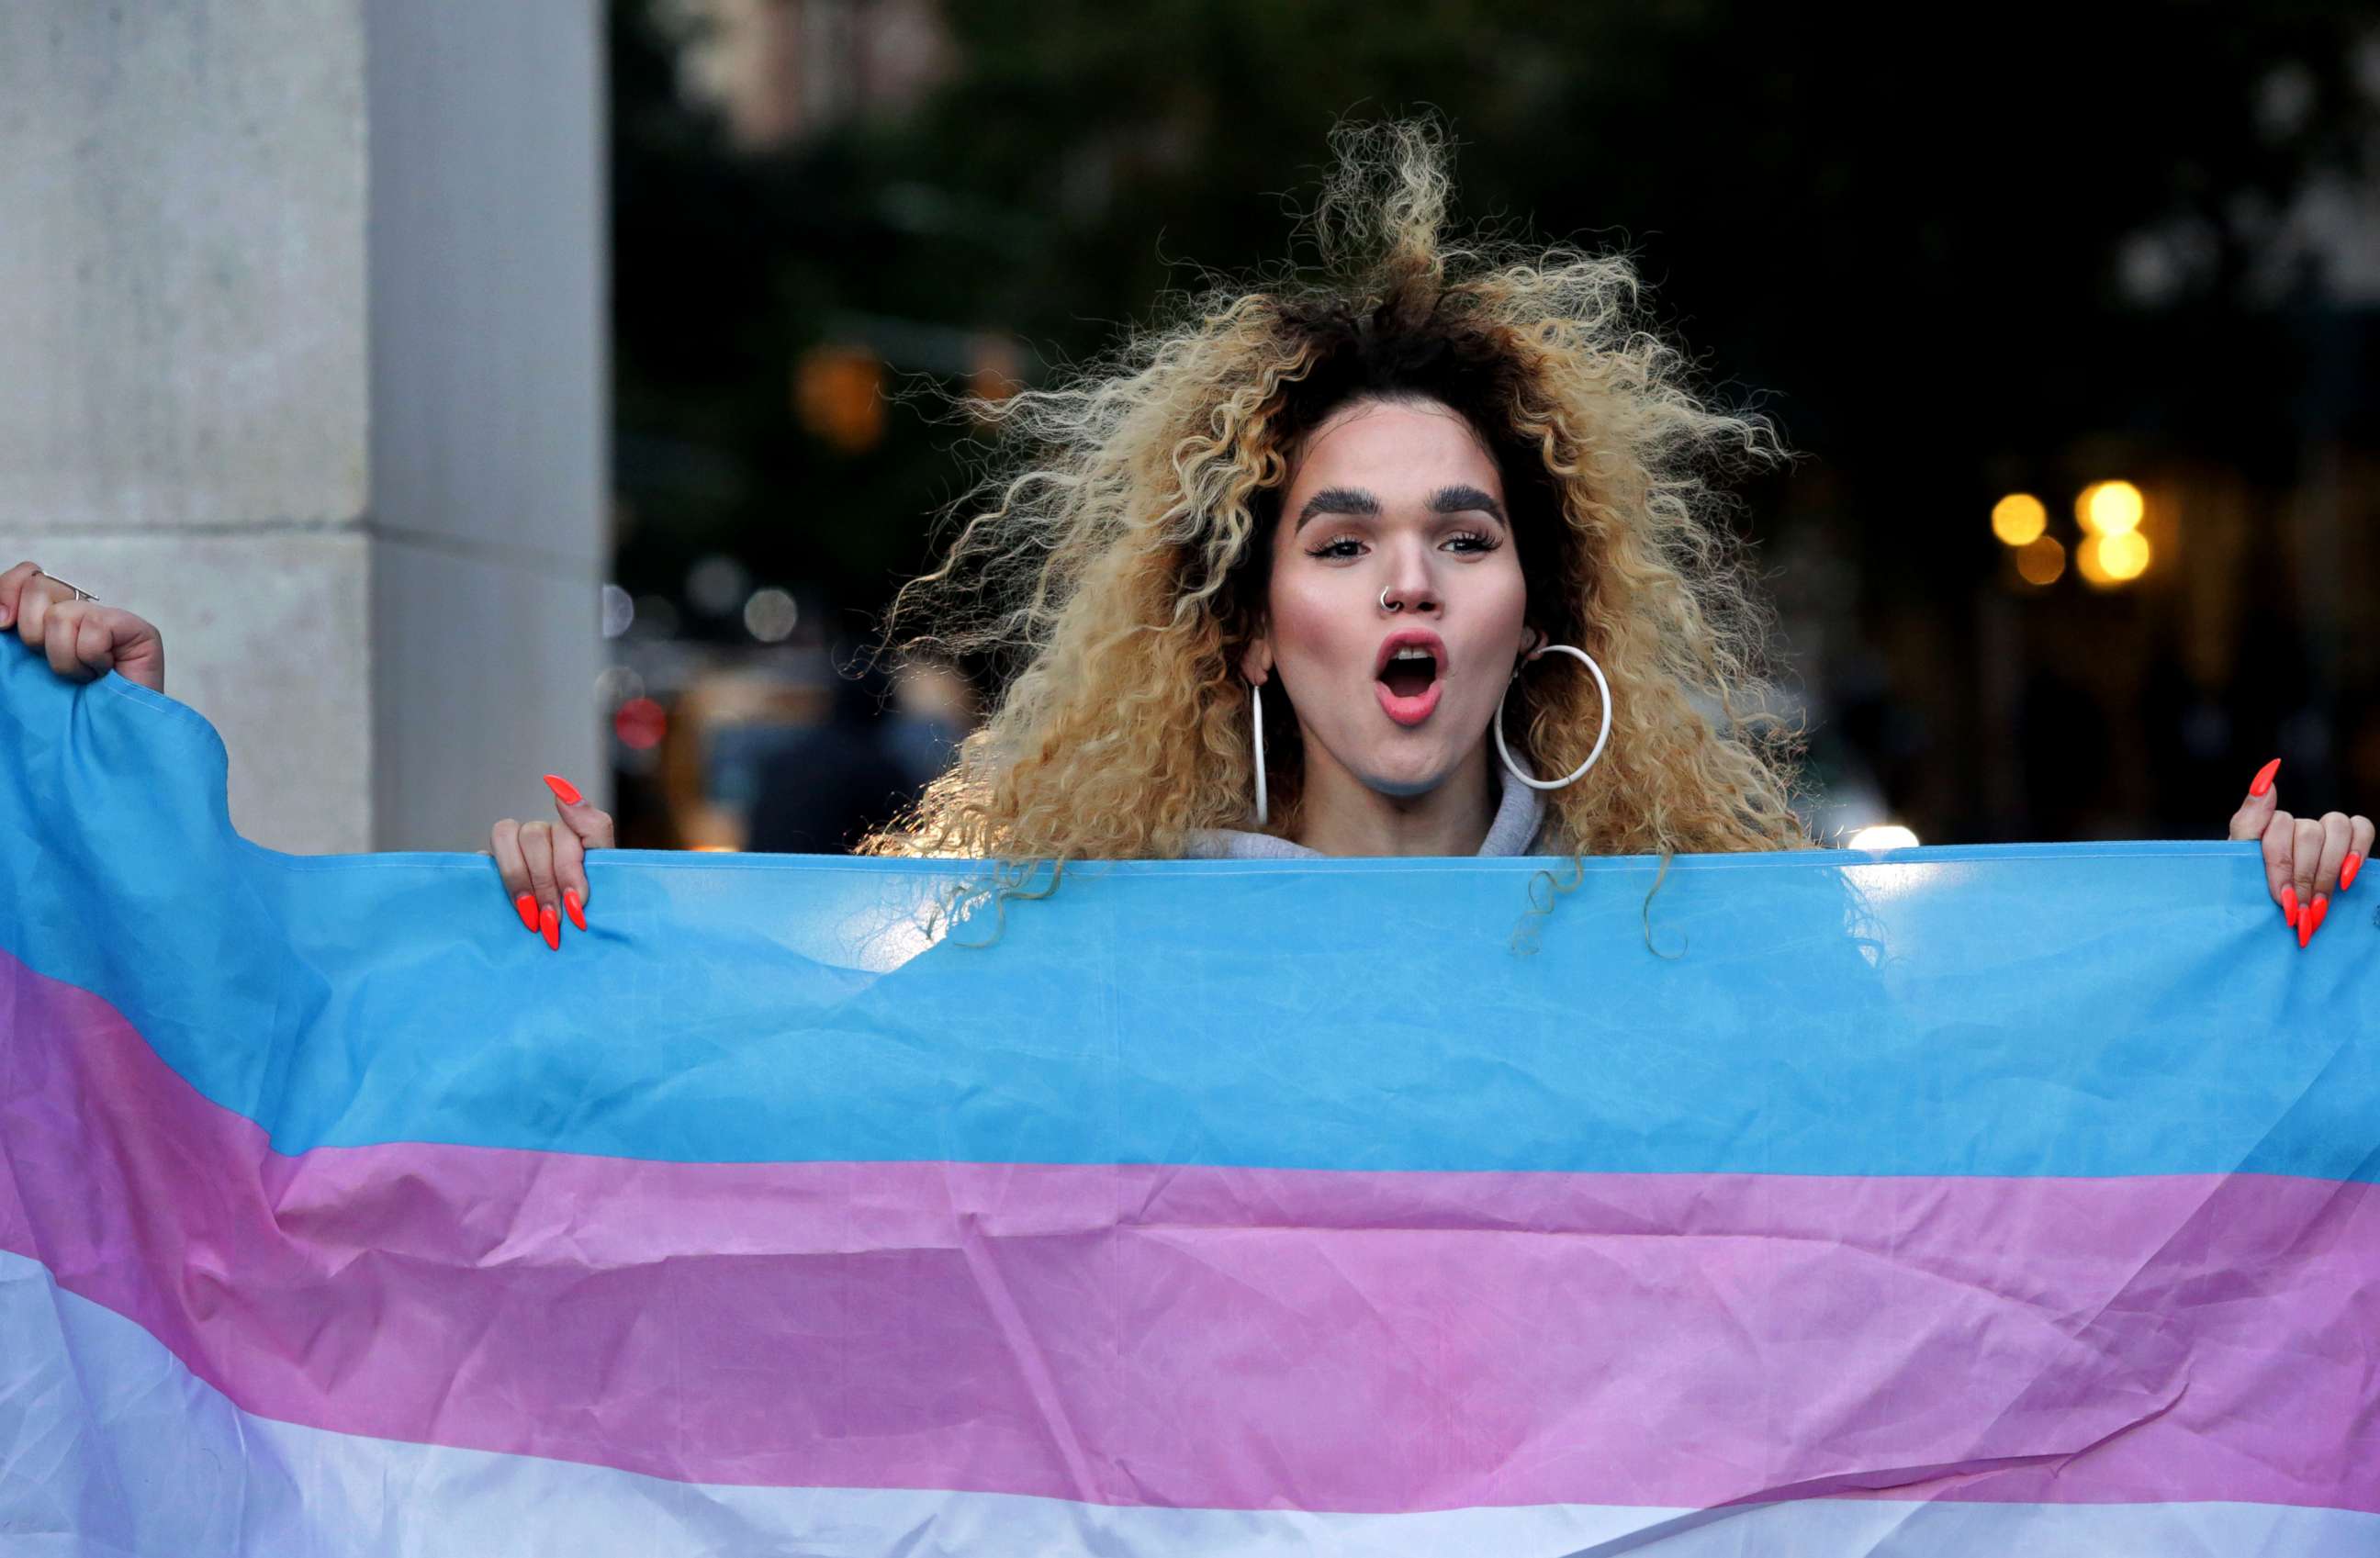 PHOTO: Morgin Dupont, 25, a woman of trans experience, holds up the flag for Transgender and Gender Noncomforming people at a rally for LGBTQI+ rights at Washington Square Park on October 21, 2018 in New York City.